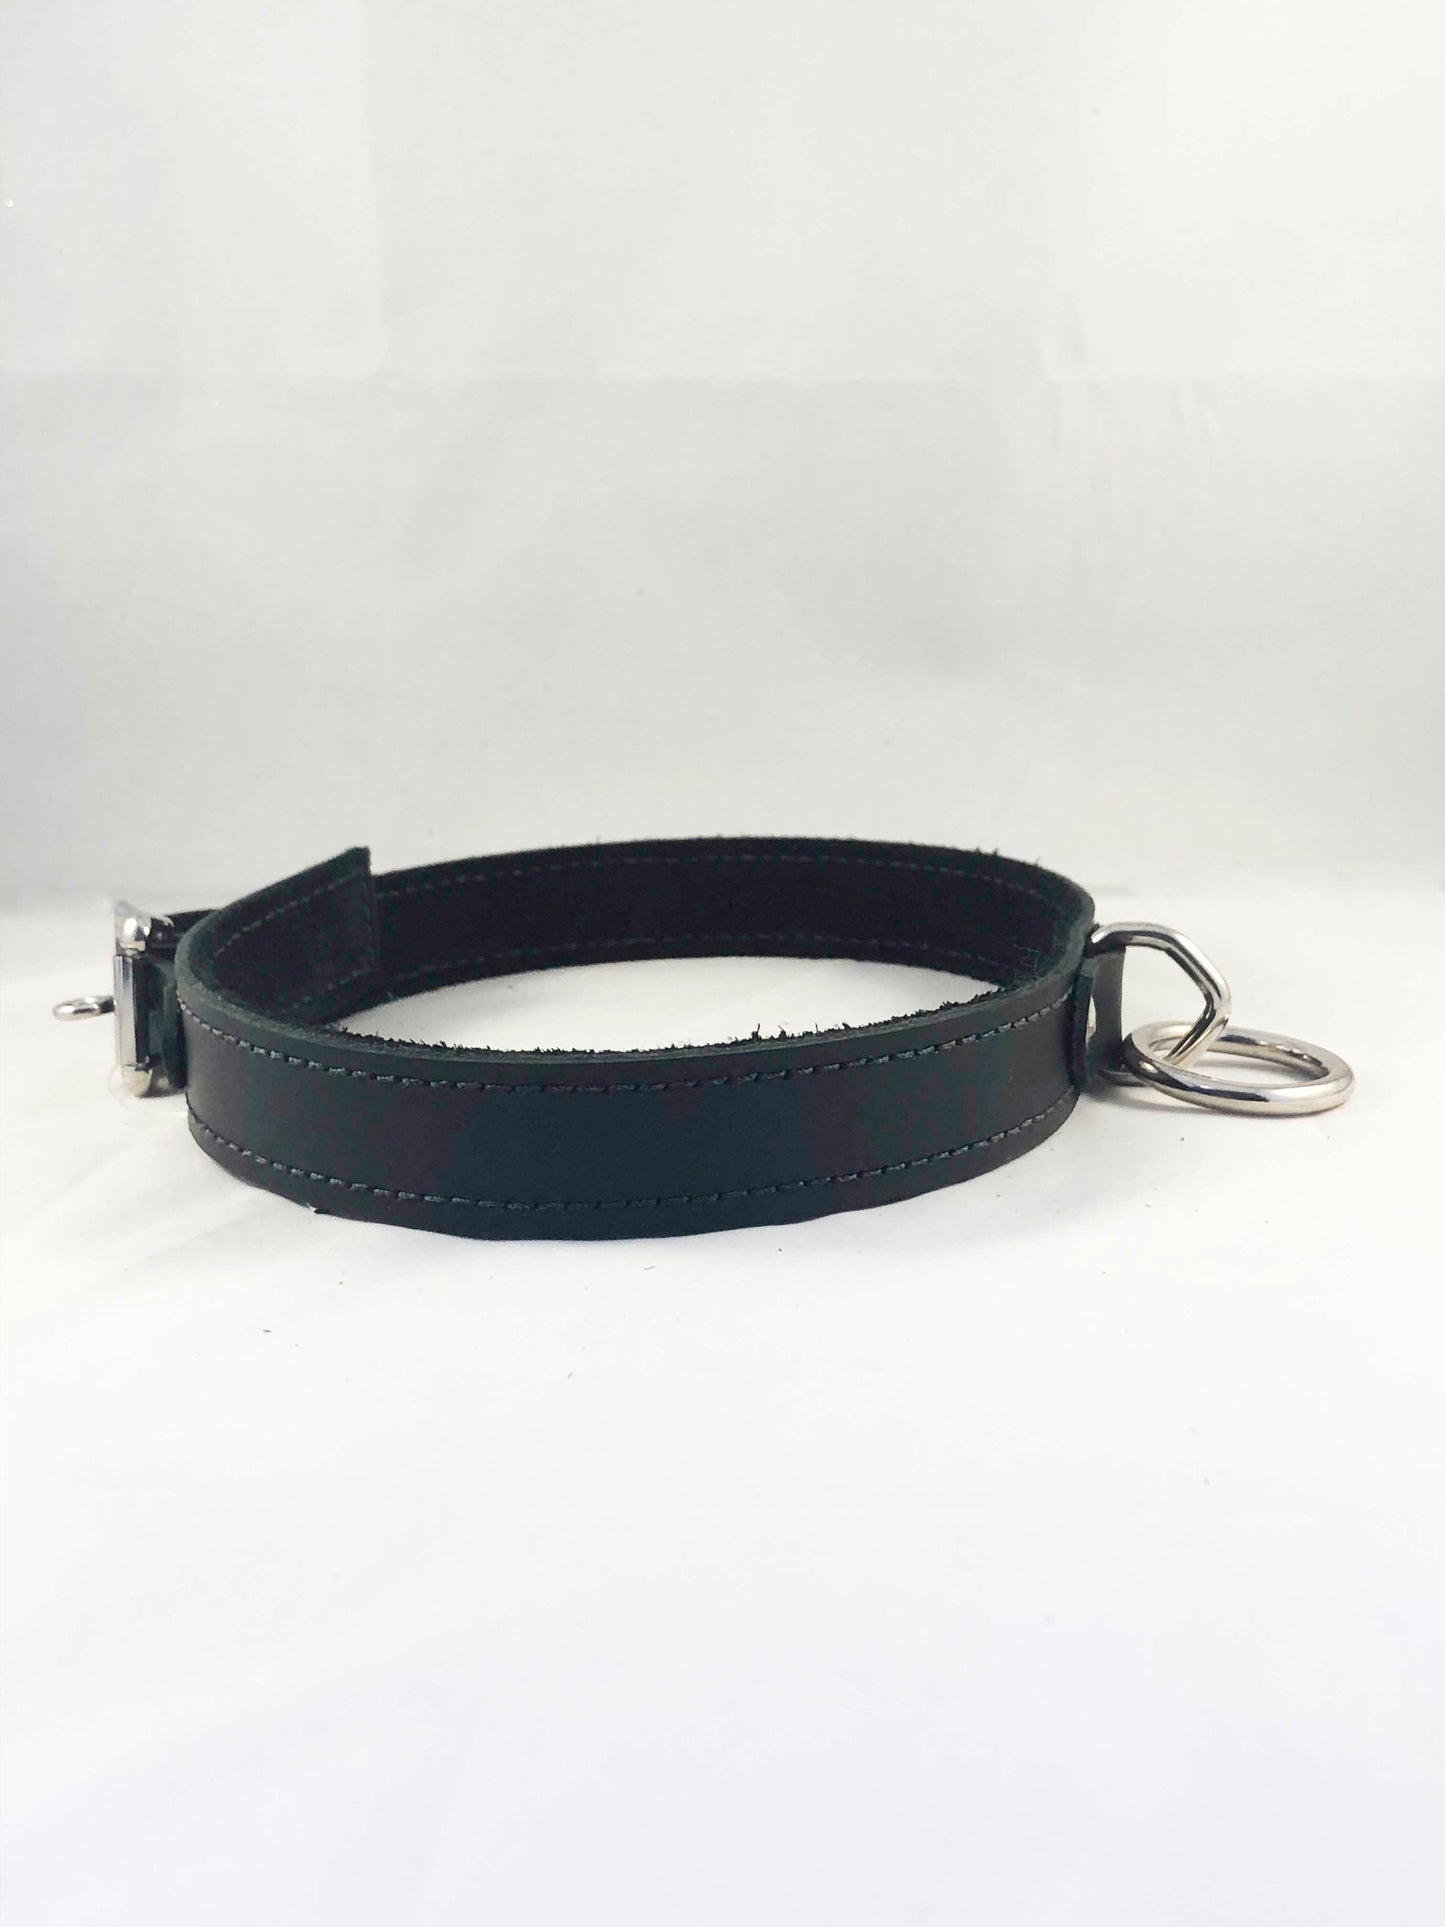 Side view of the black Basic Single Ring Collar.